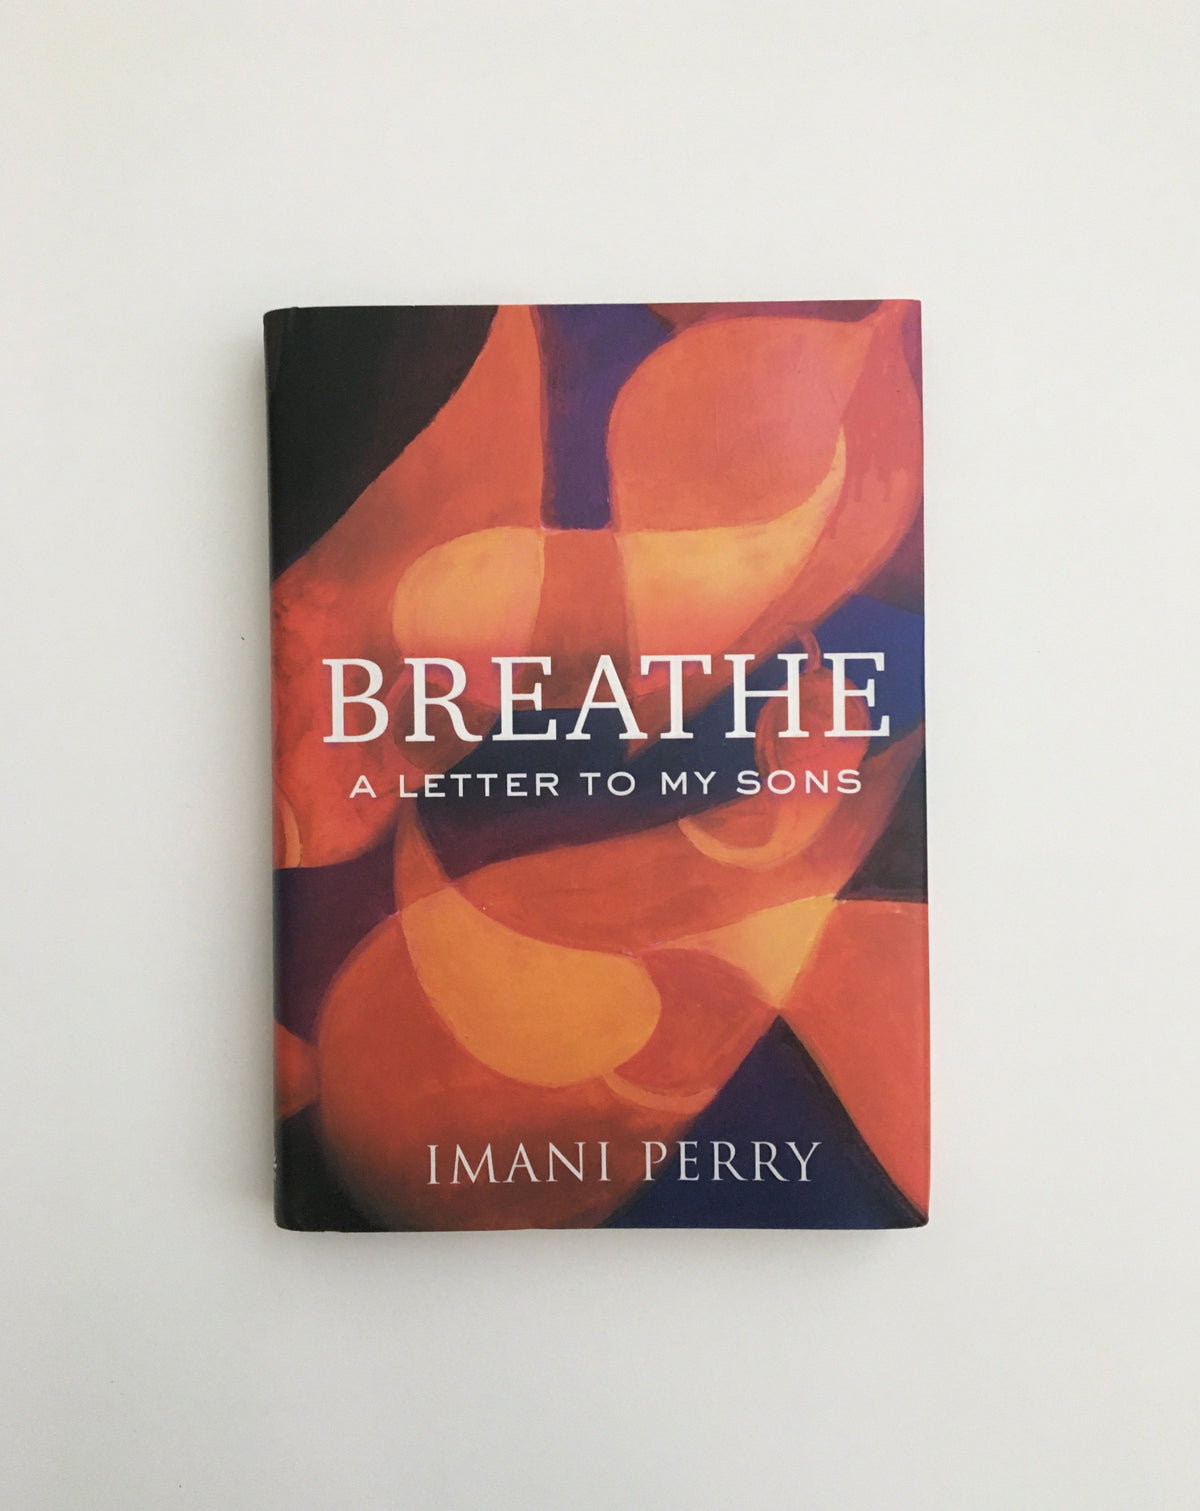 Breathe: A Letter to my Sons by Imani Perry, book, Ten Dollar Books, Ten Dollar Books